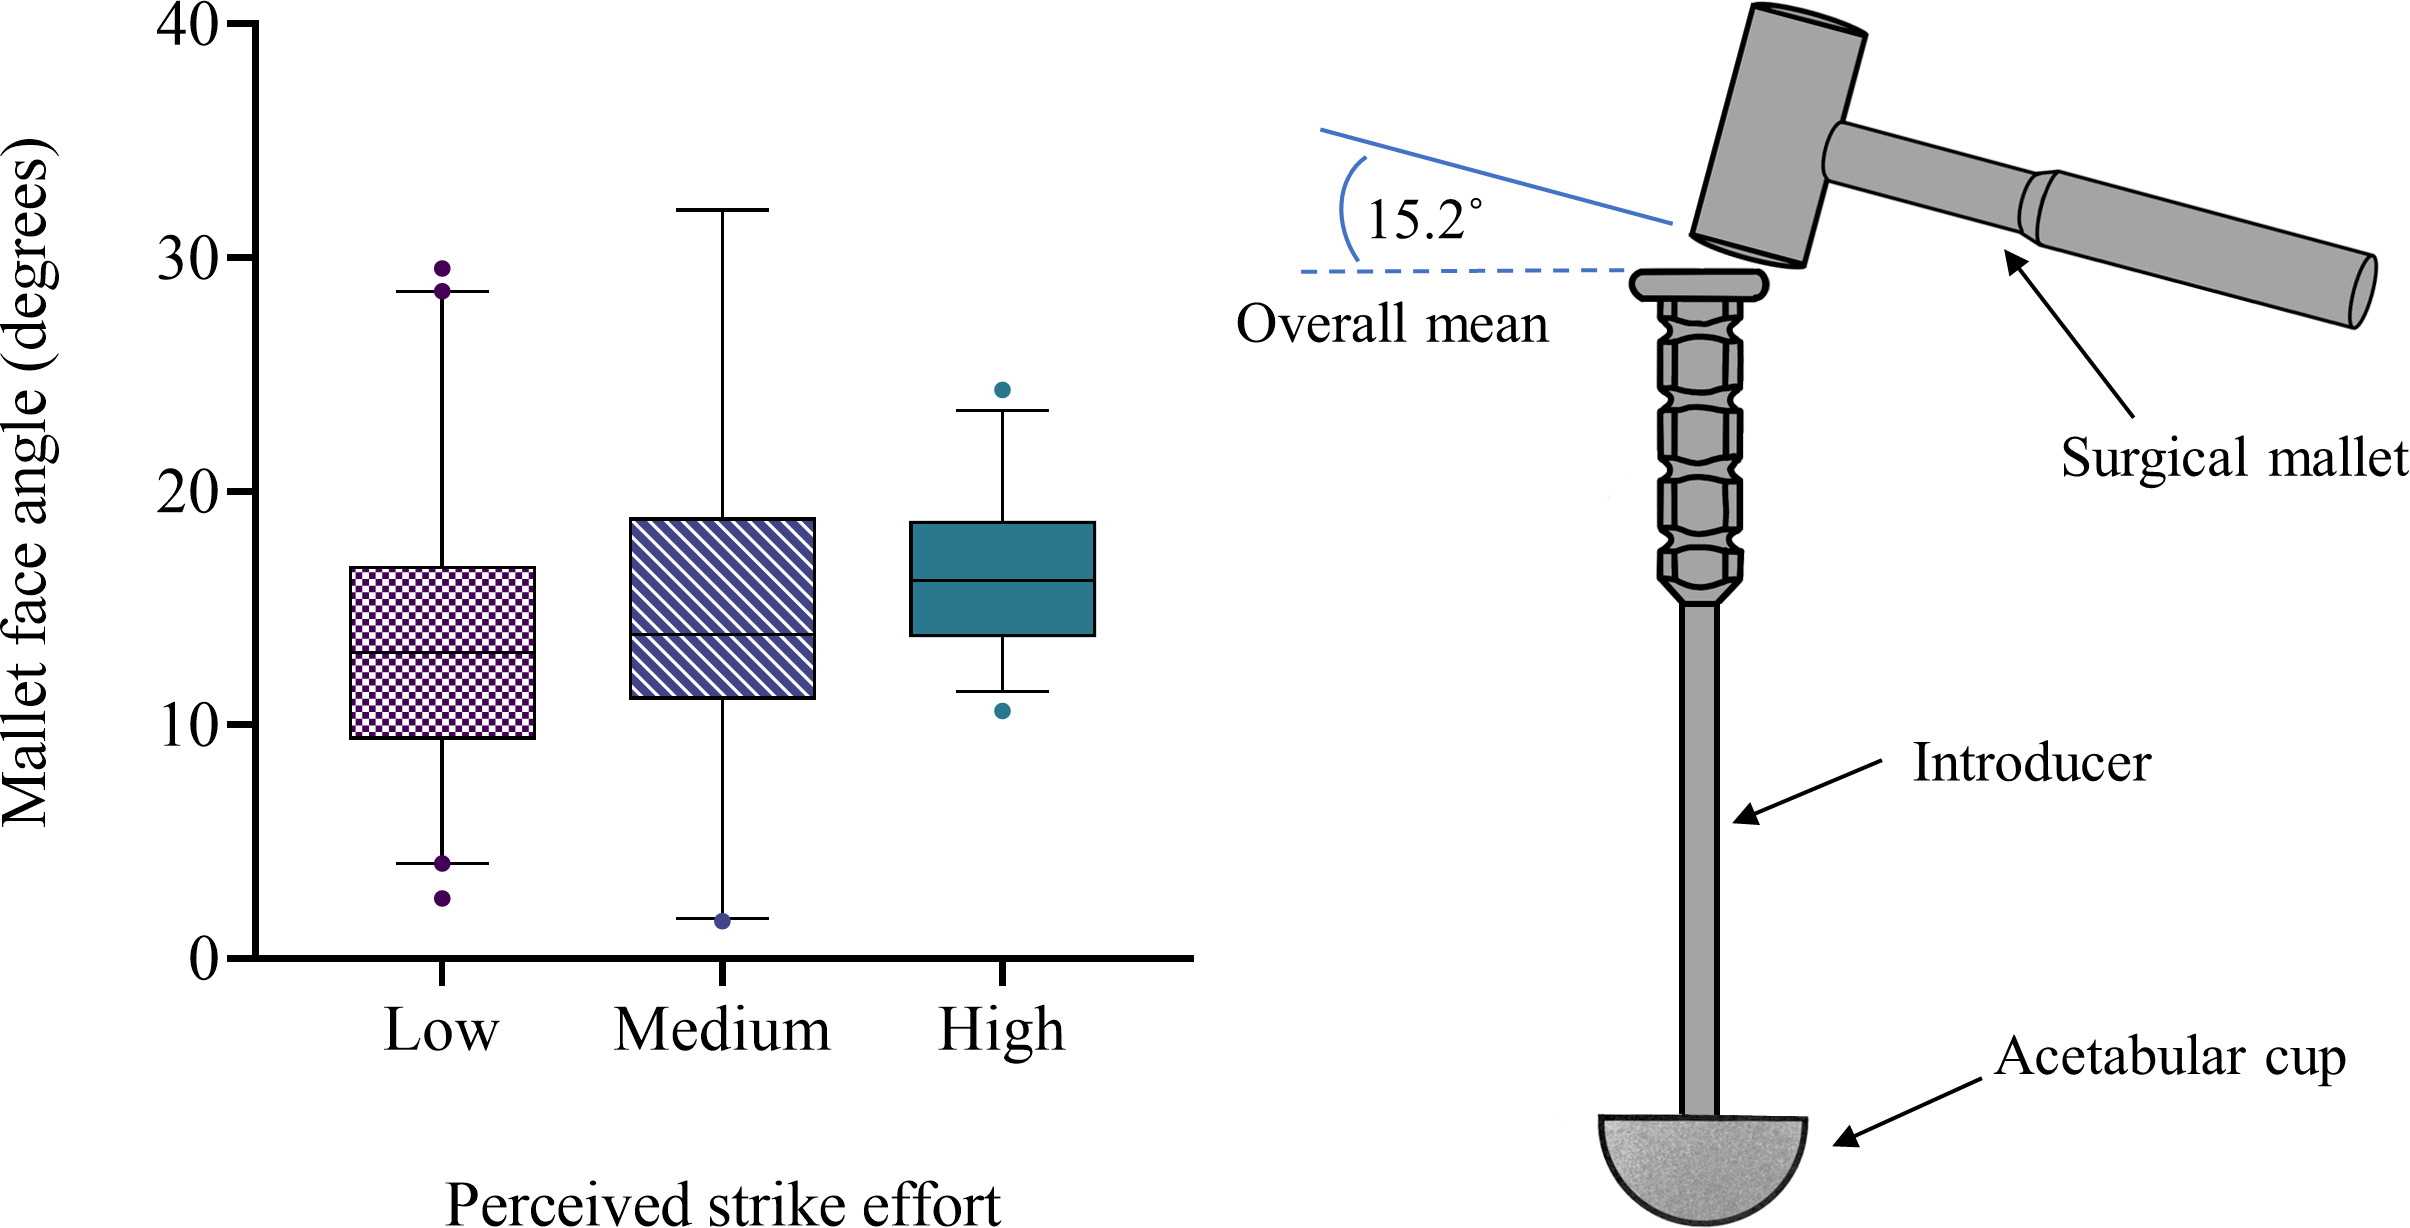 Fig. 5 
            Mallet face alignment angles for low, medium, and high strike efforts during cadaveric total hip arthroplasties. The box represents the interquartile range, the centre line represents the median, and the whiskers represent the 5th to 95th percentile range.
          